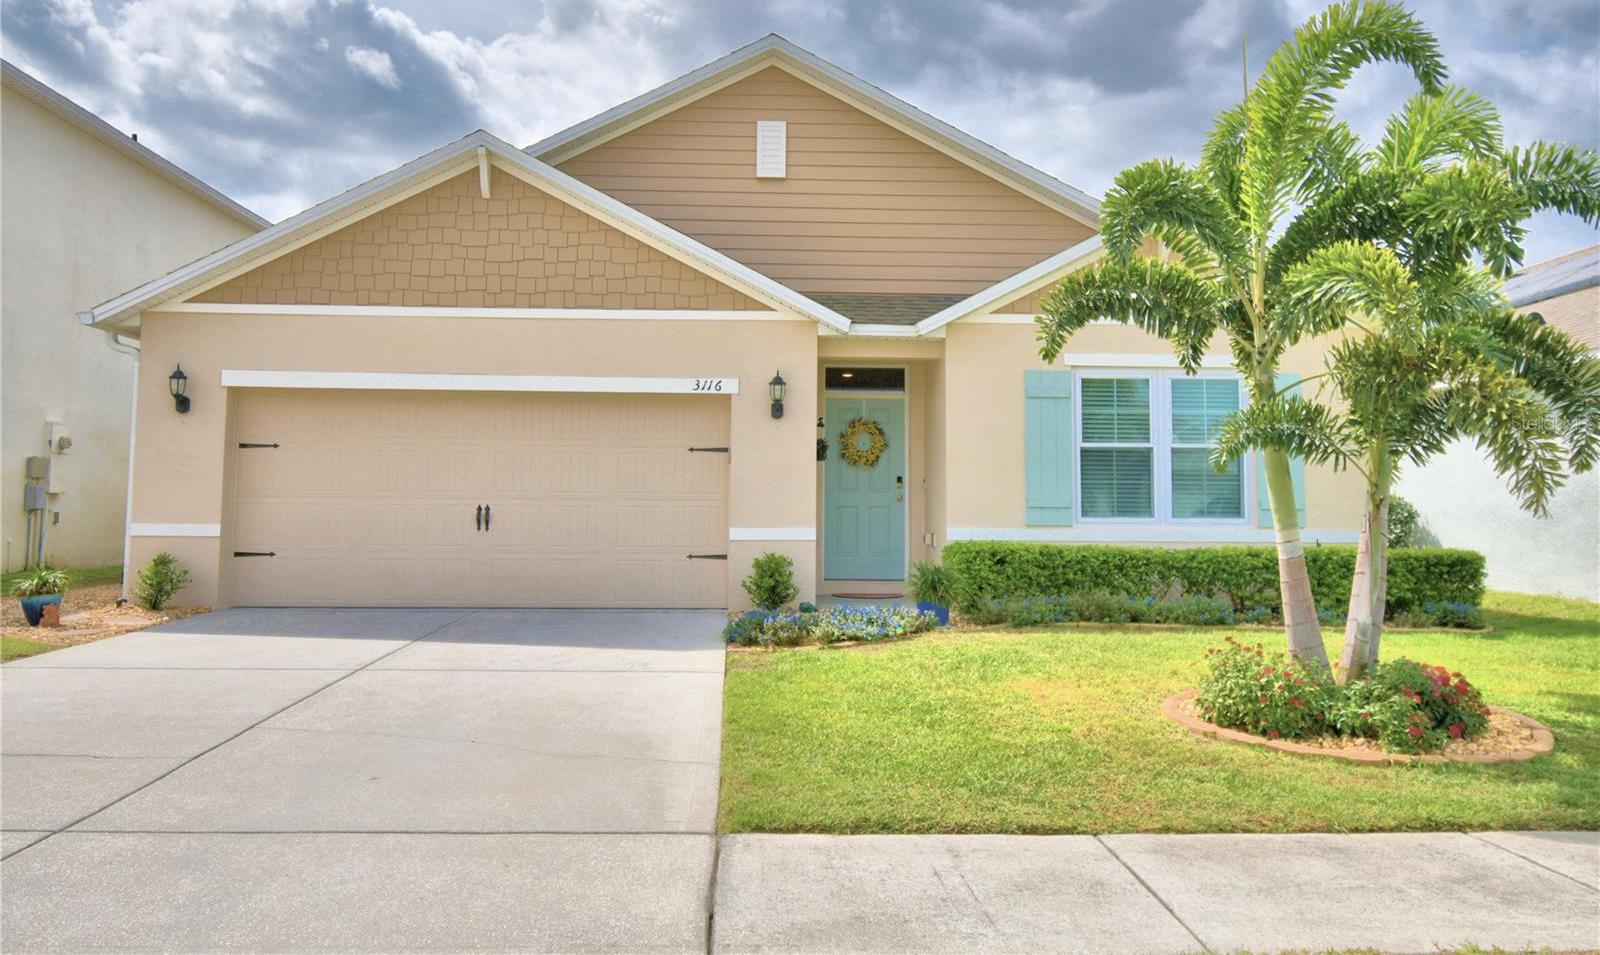 Photo one of 3116 Country Club Cir Winter Haven FL 33881 | MLS L4943558